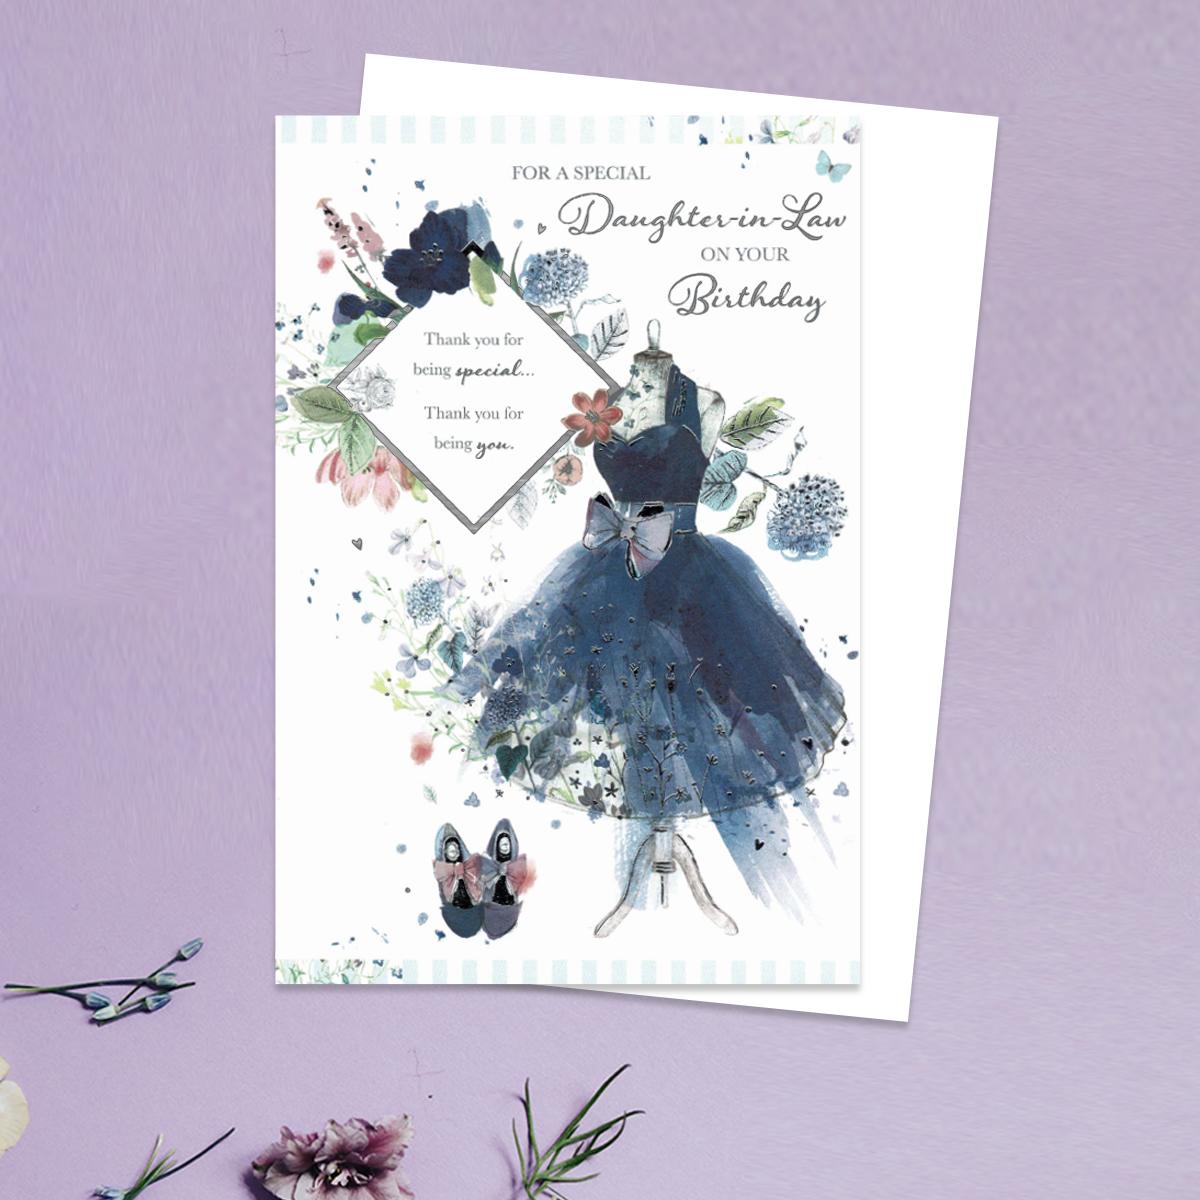 For A Special Daughter In Law On Your Birthday Showing A Beautiful Blue Cocktail Dress On A Stand With Blue Shoes And Flowers. Complete With White Envelope